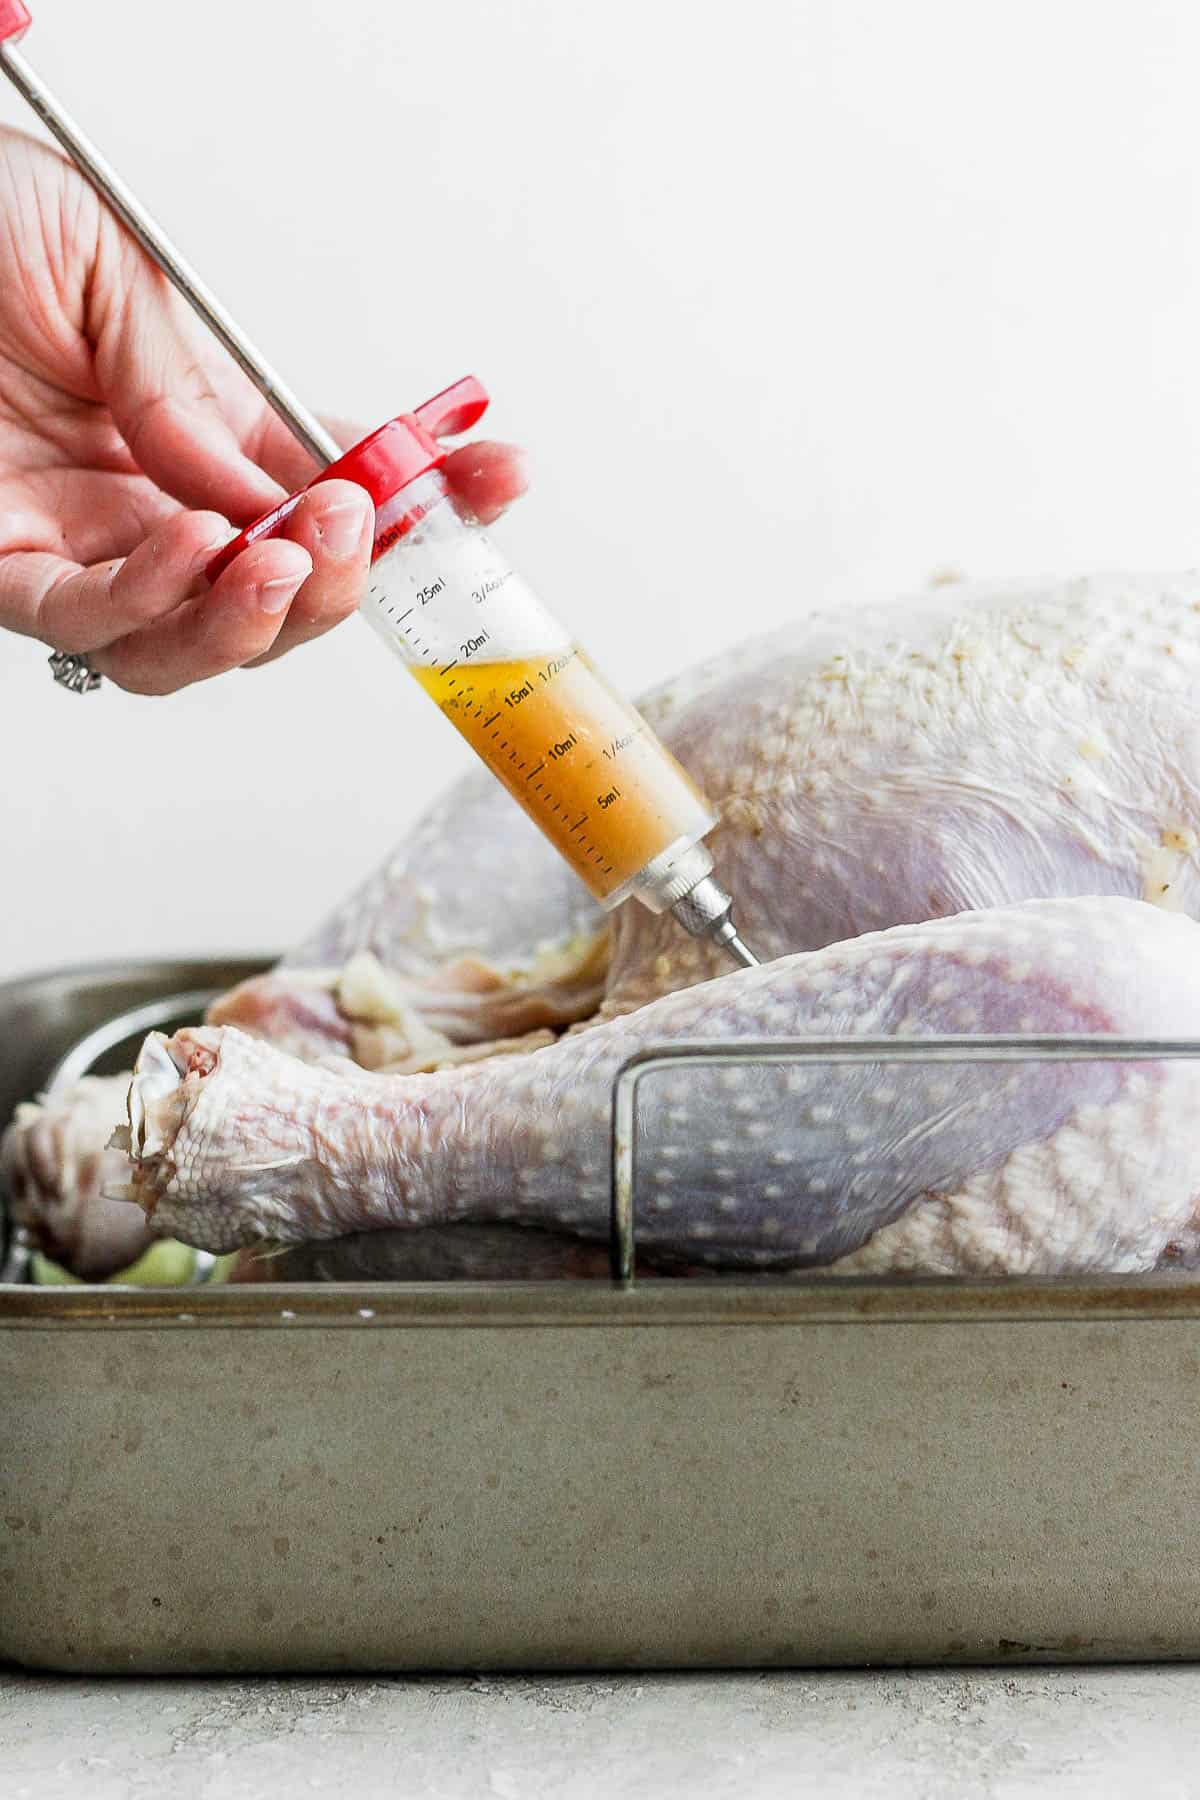 The melted butter mixture being injected into the turkey thigh.